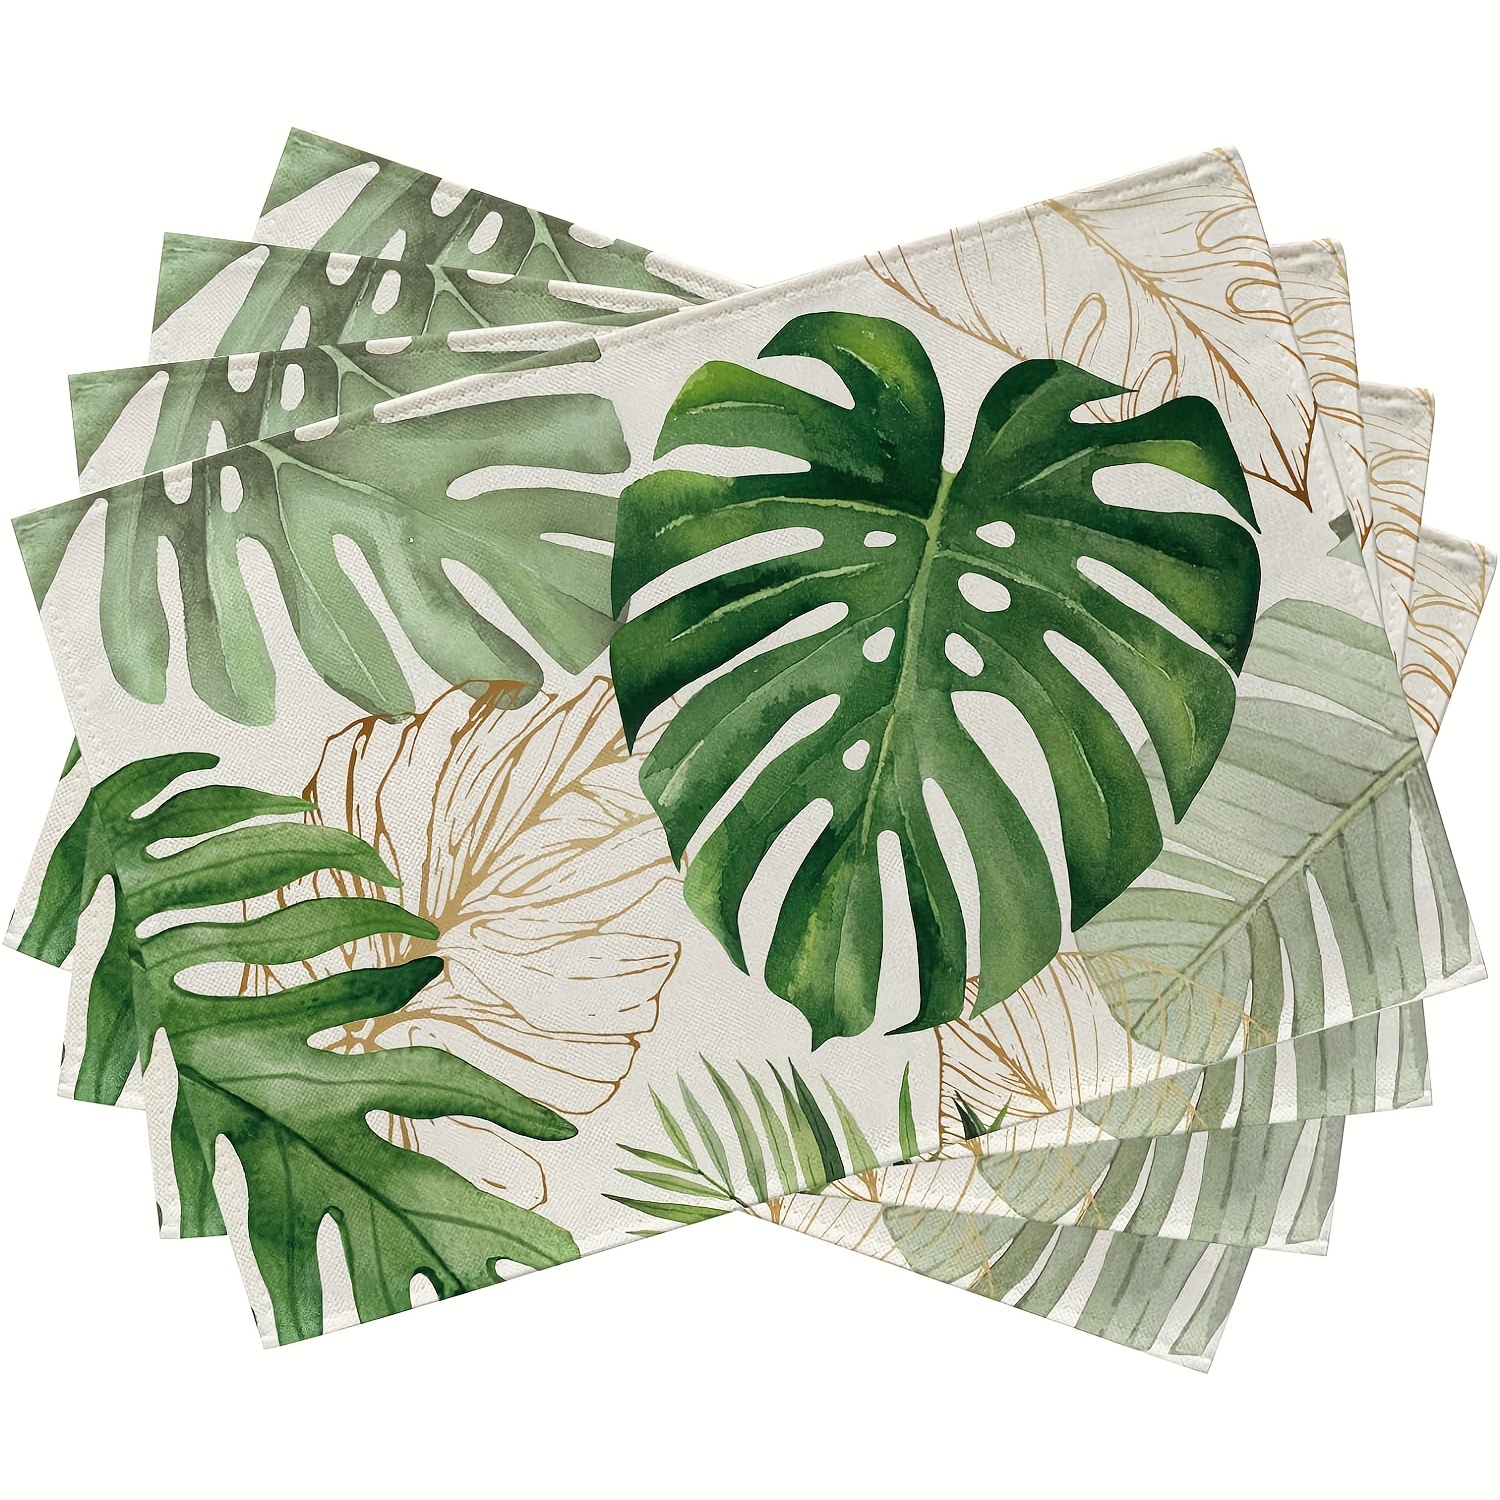 

Tropical Monstera Leaf Placemats Set Of 4, Woven Polyester Table Mats, Machine Washable, Durable Rectangle Dining Decor, Greenery Palm Leaf Design For Home And Kitchen Decoration, 12x18 Inches